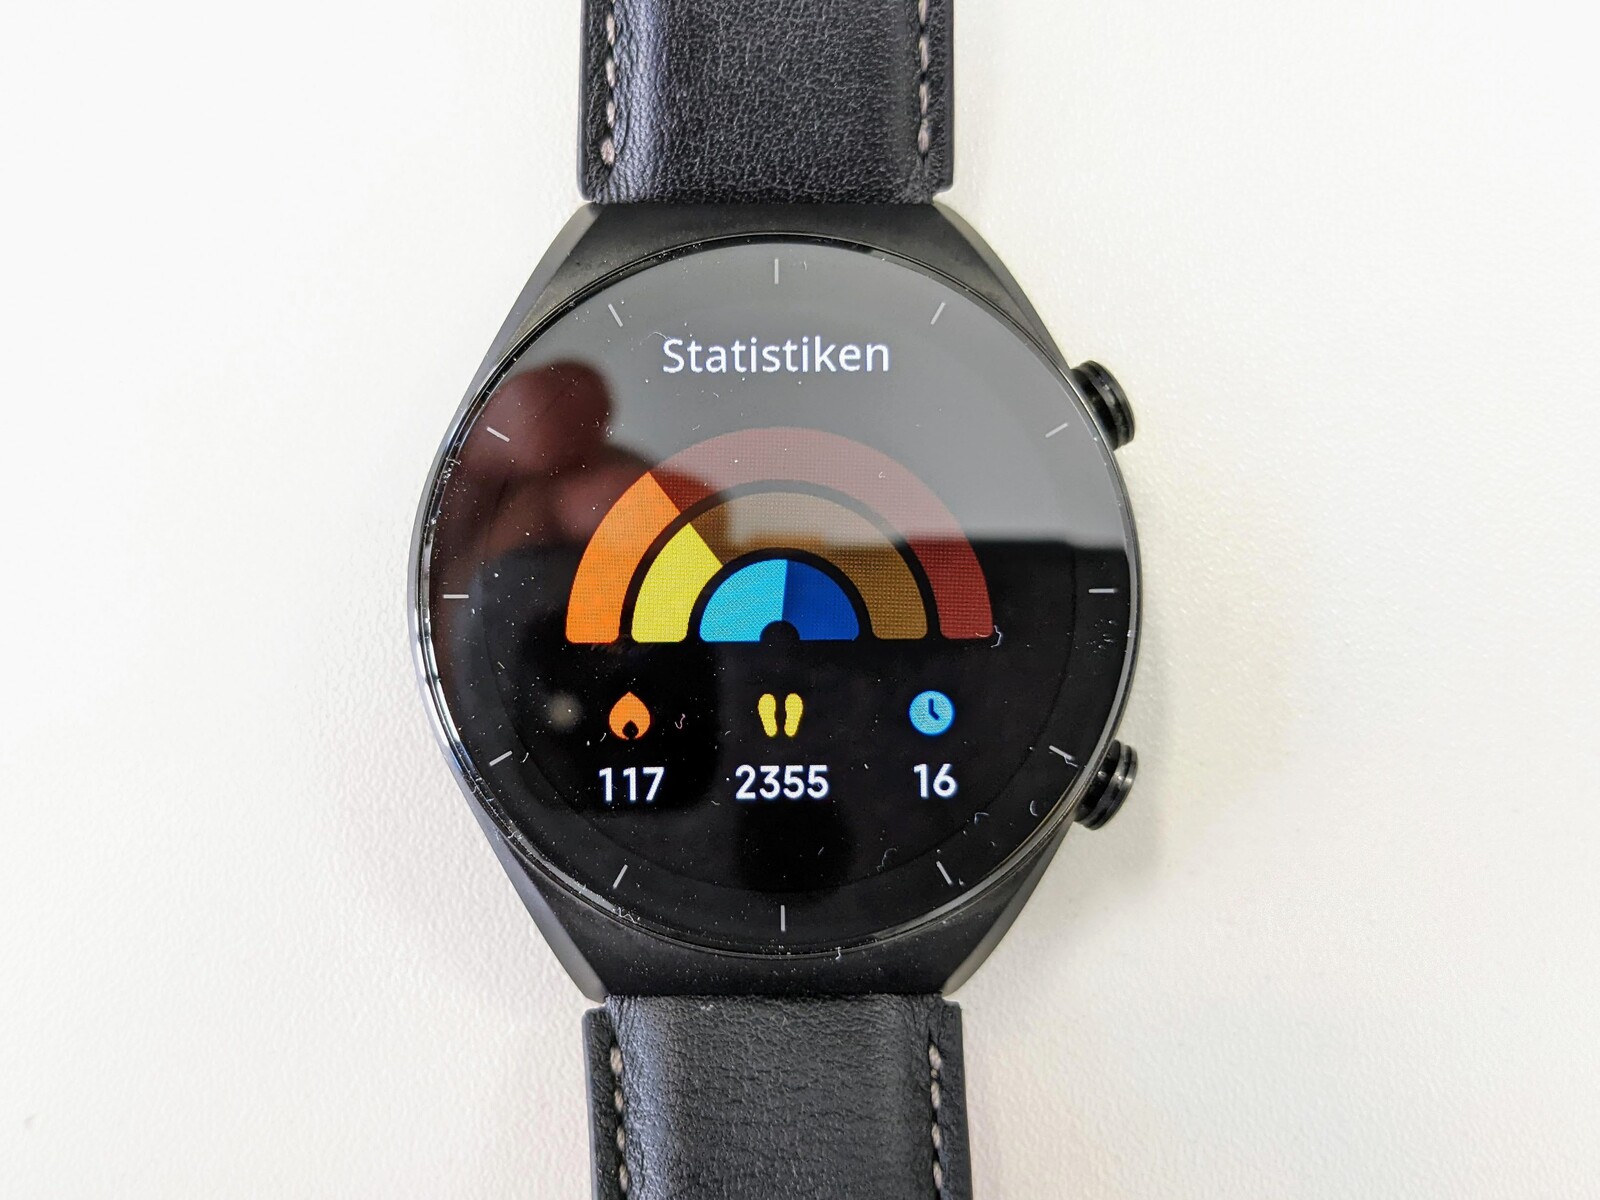 Xiaomi Watch S1 and S1 Active Review